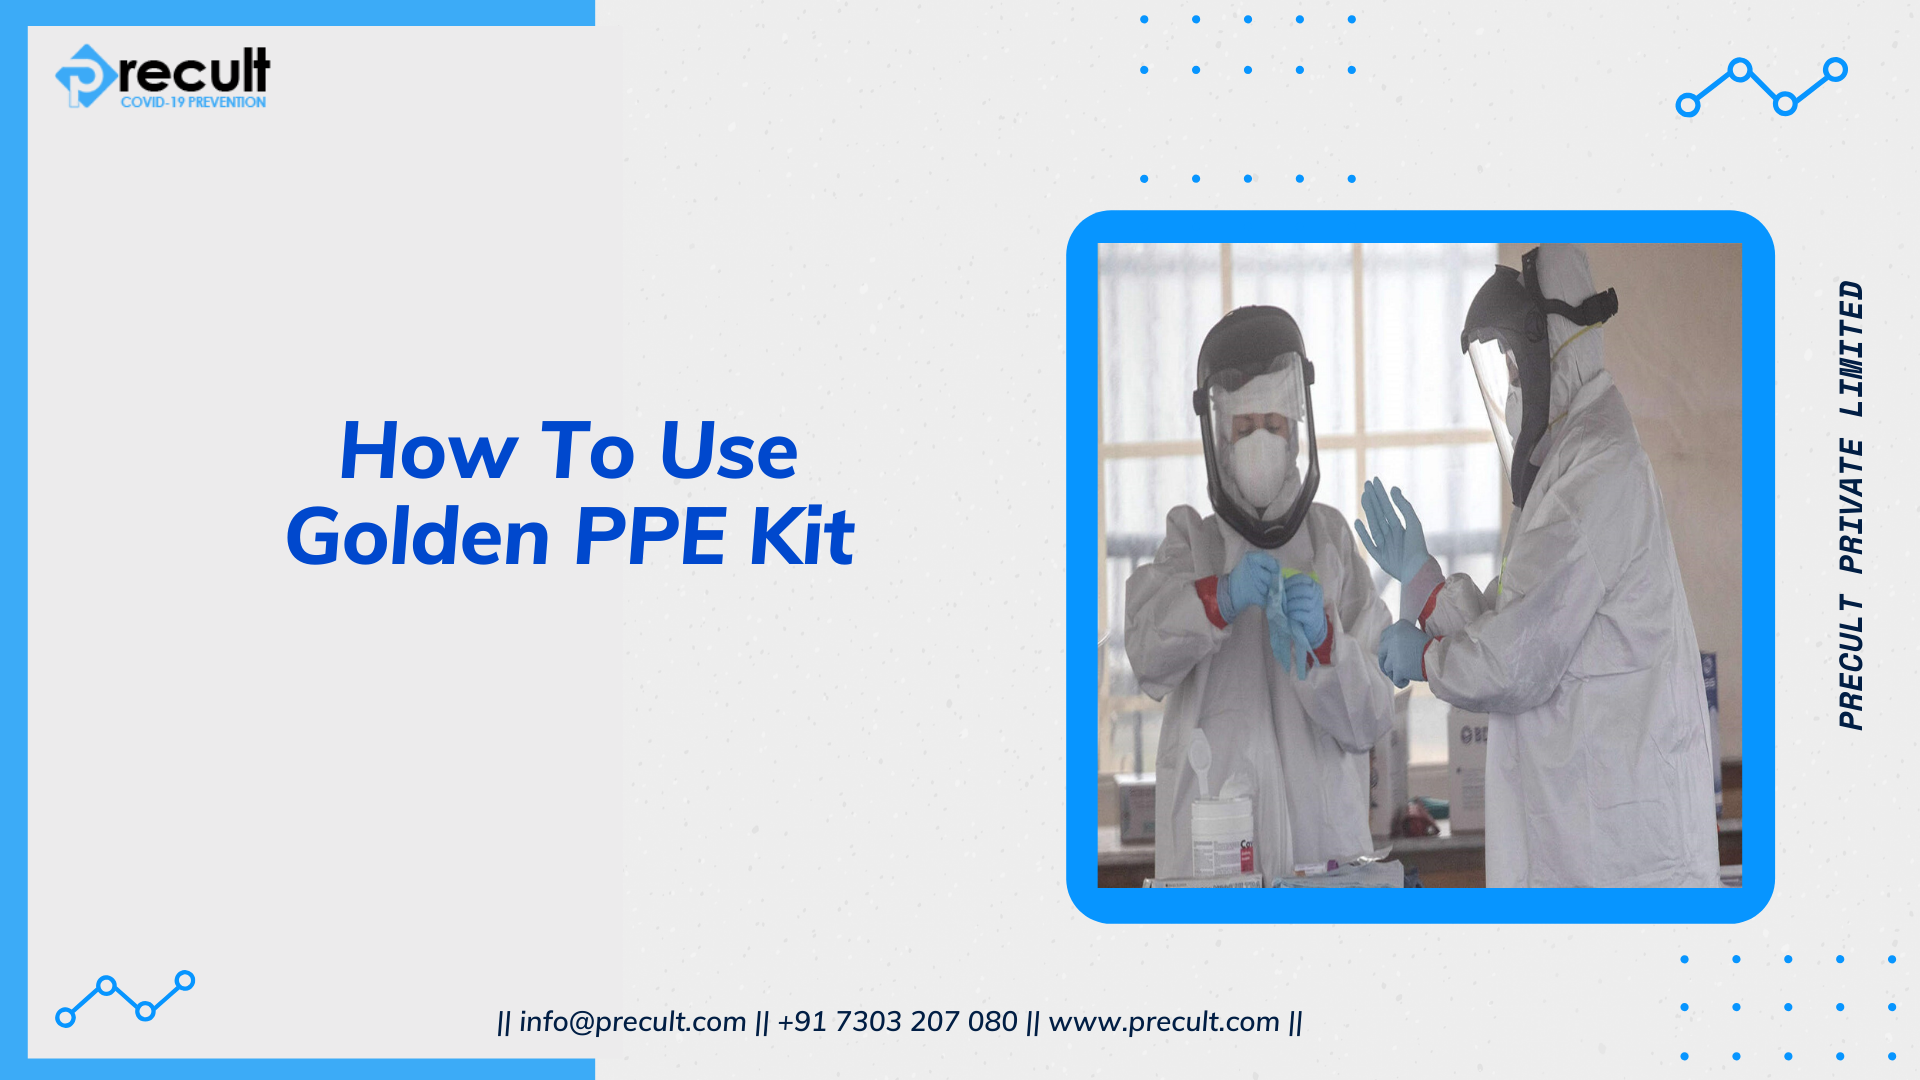 How To Use Golden PPE Kits